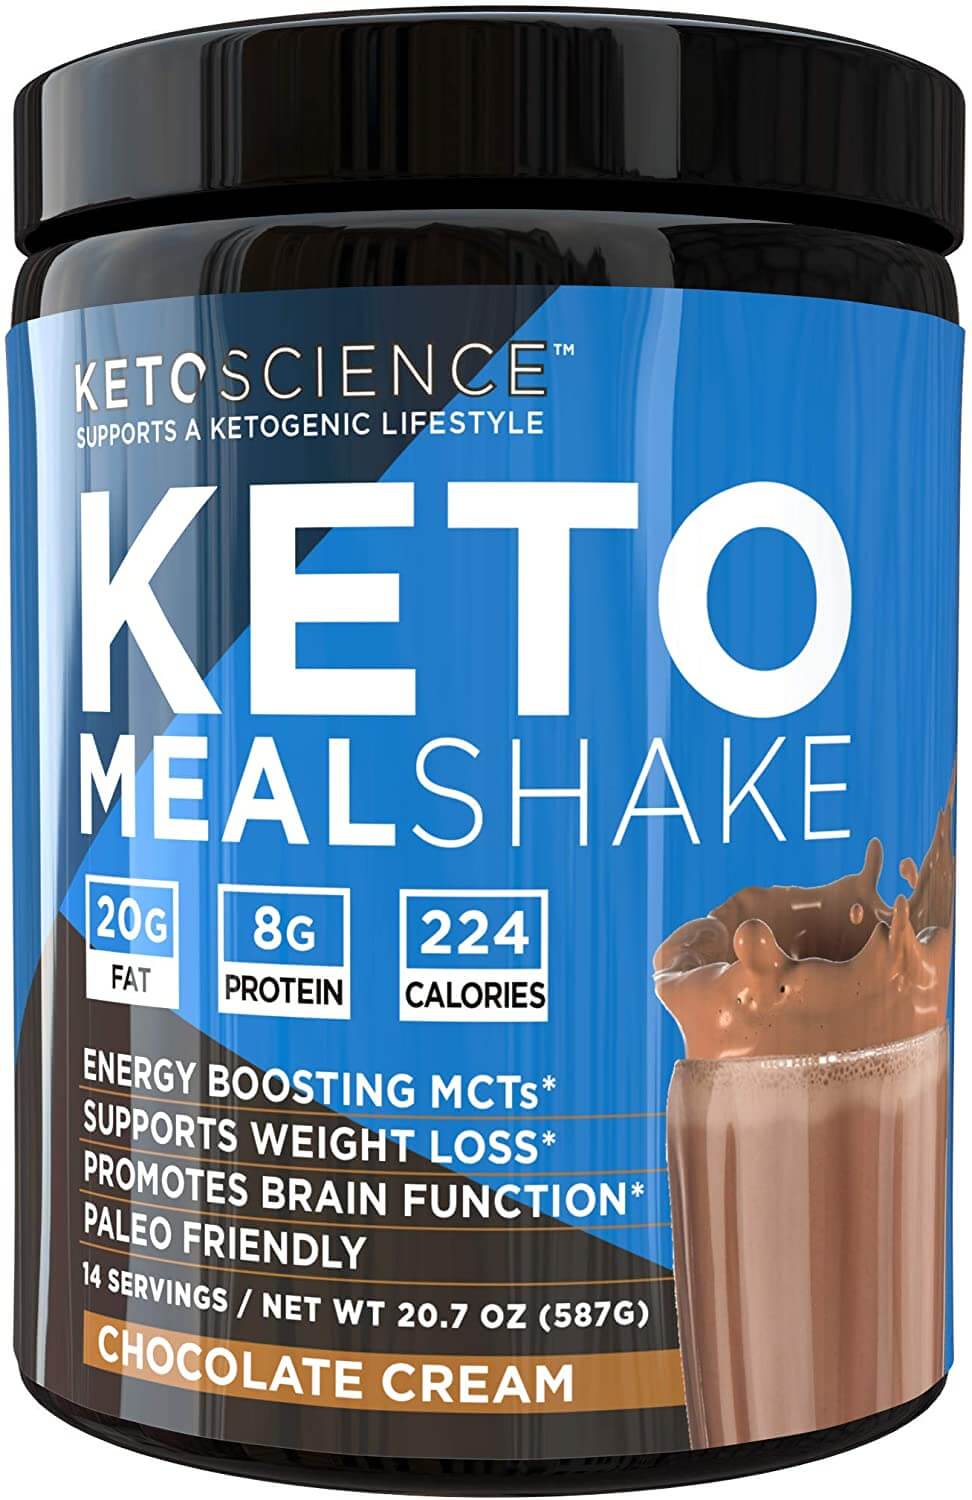 Keto Science low carb Meal Replacement Review